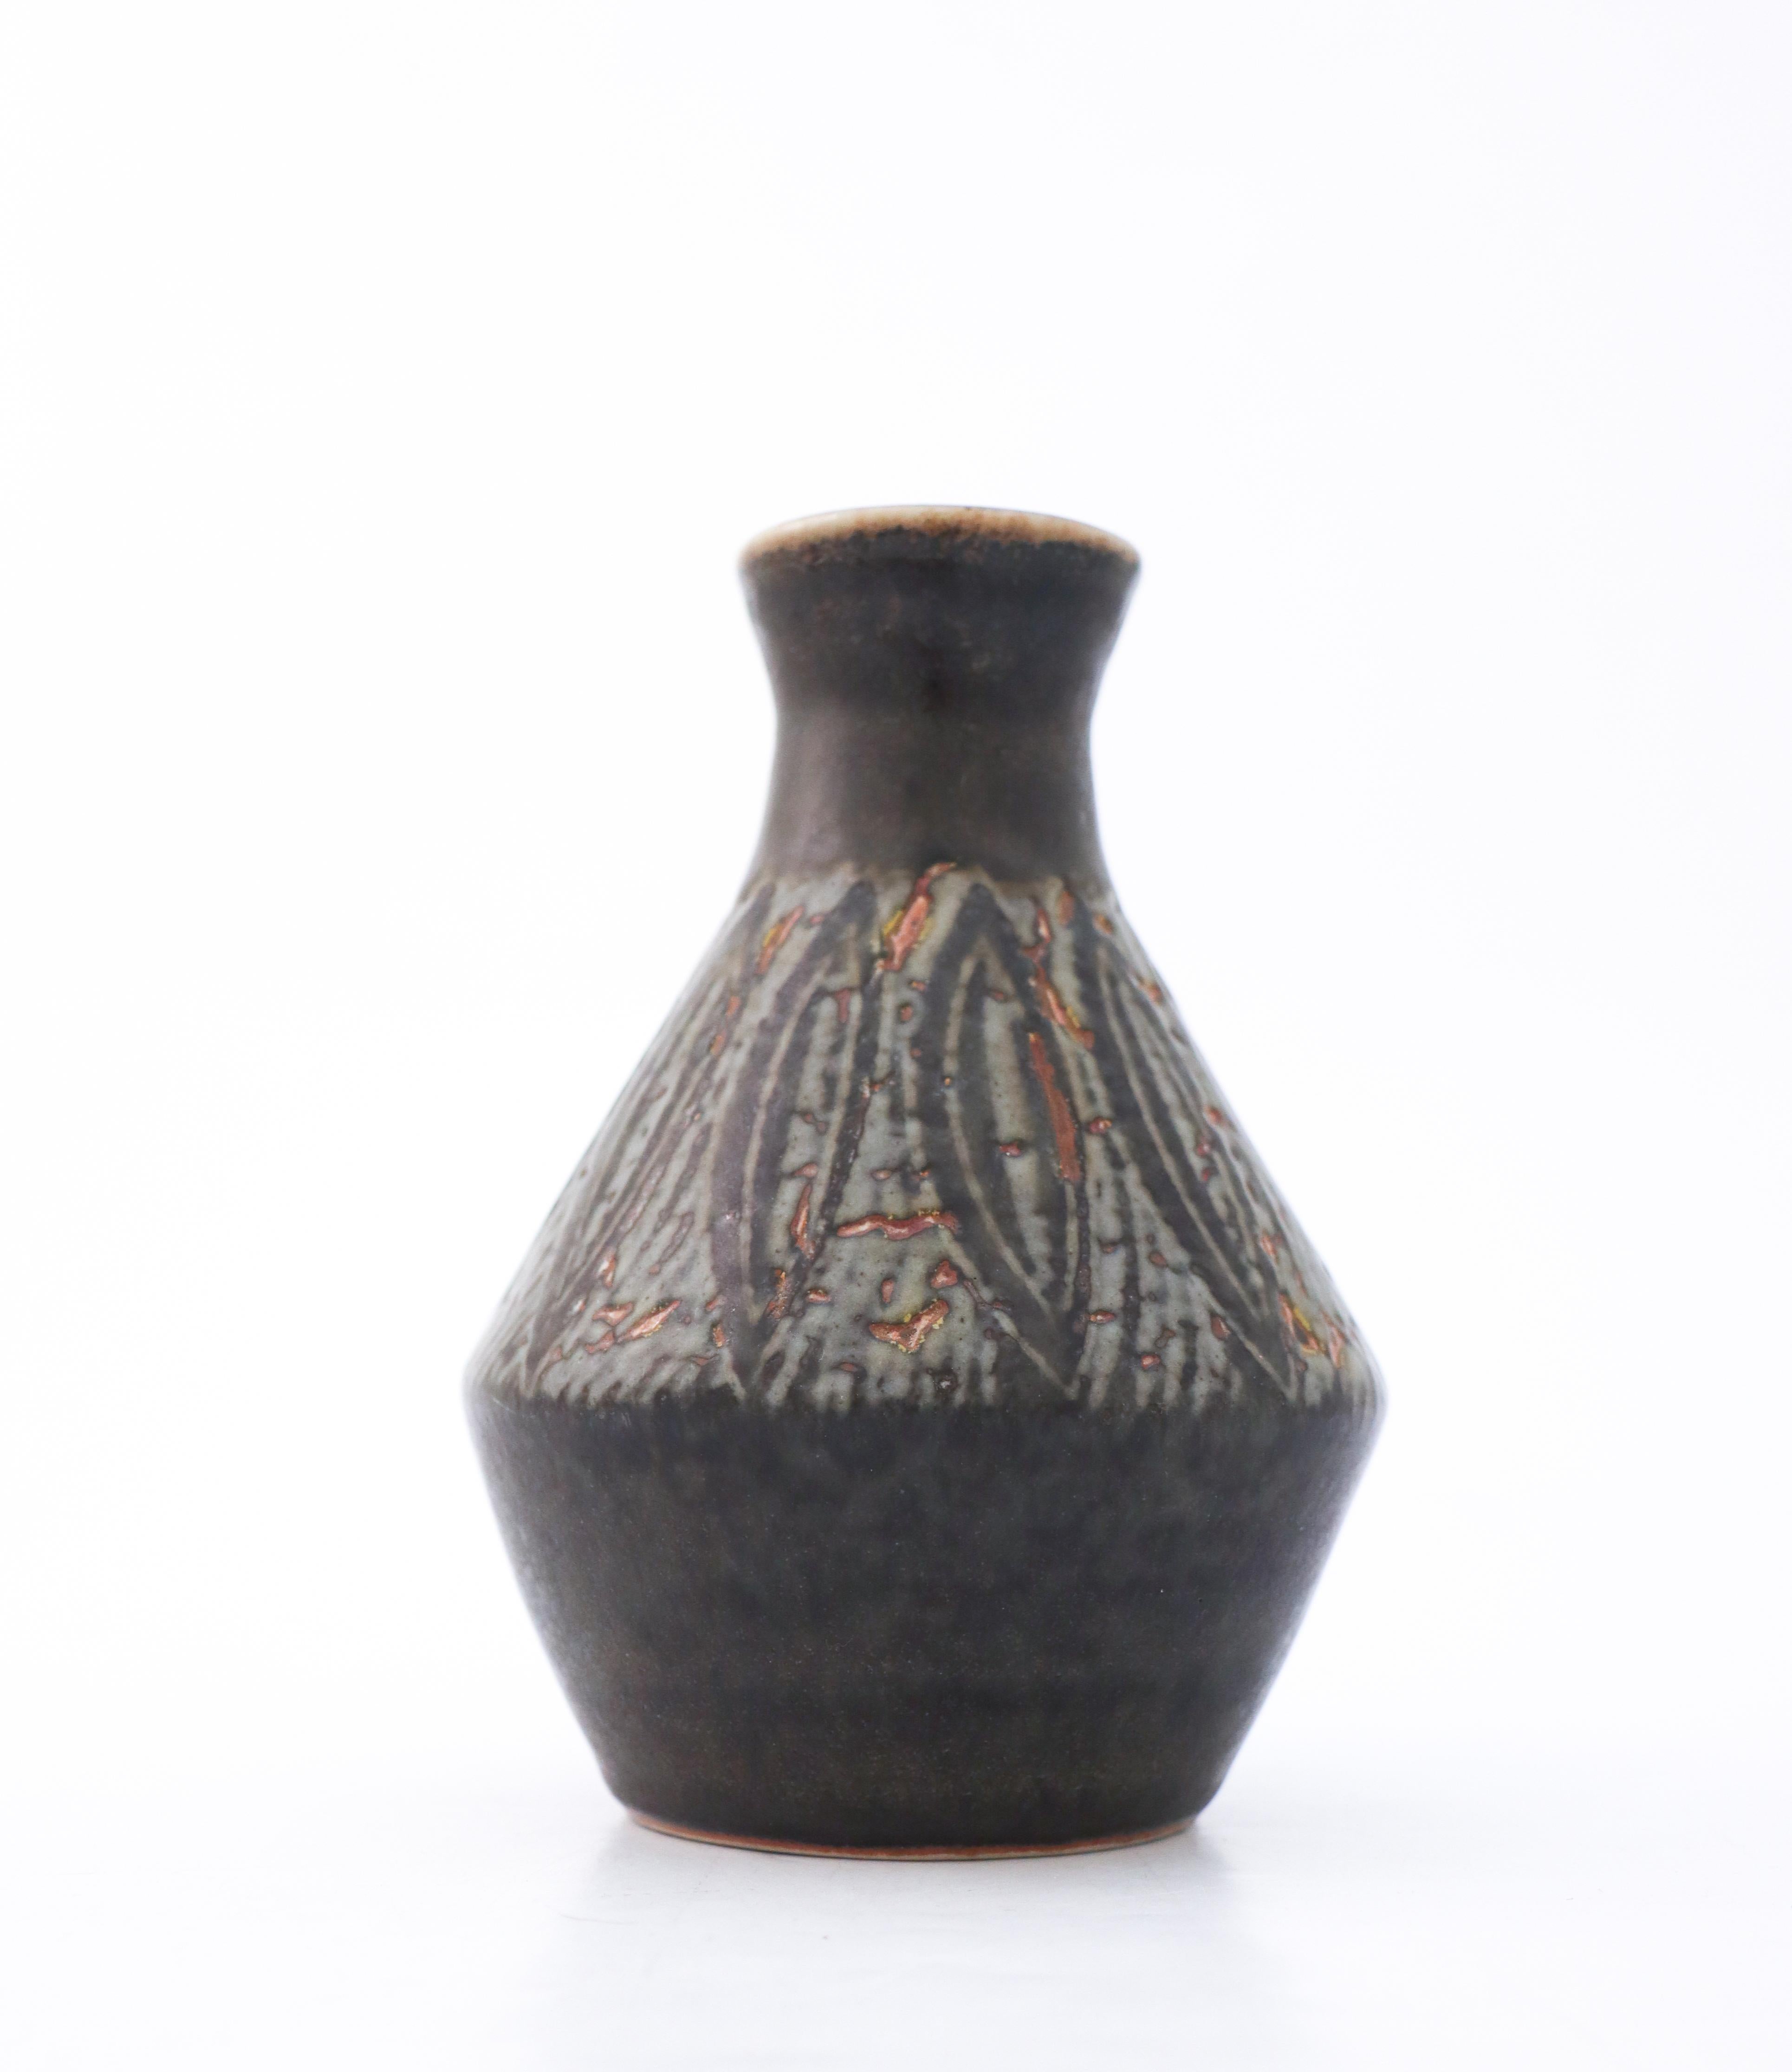 A black vase with some minor brown color at the bottom designed by Carl-Harry Stålhane at Rörstrand, It is 21 cm (8.4